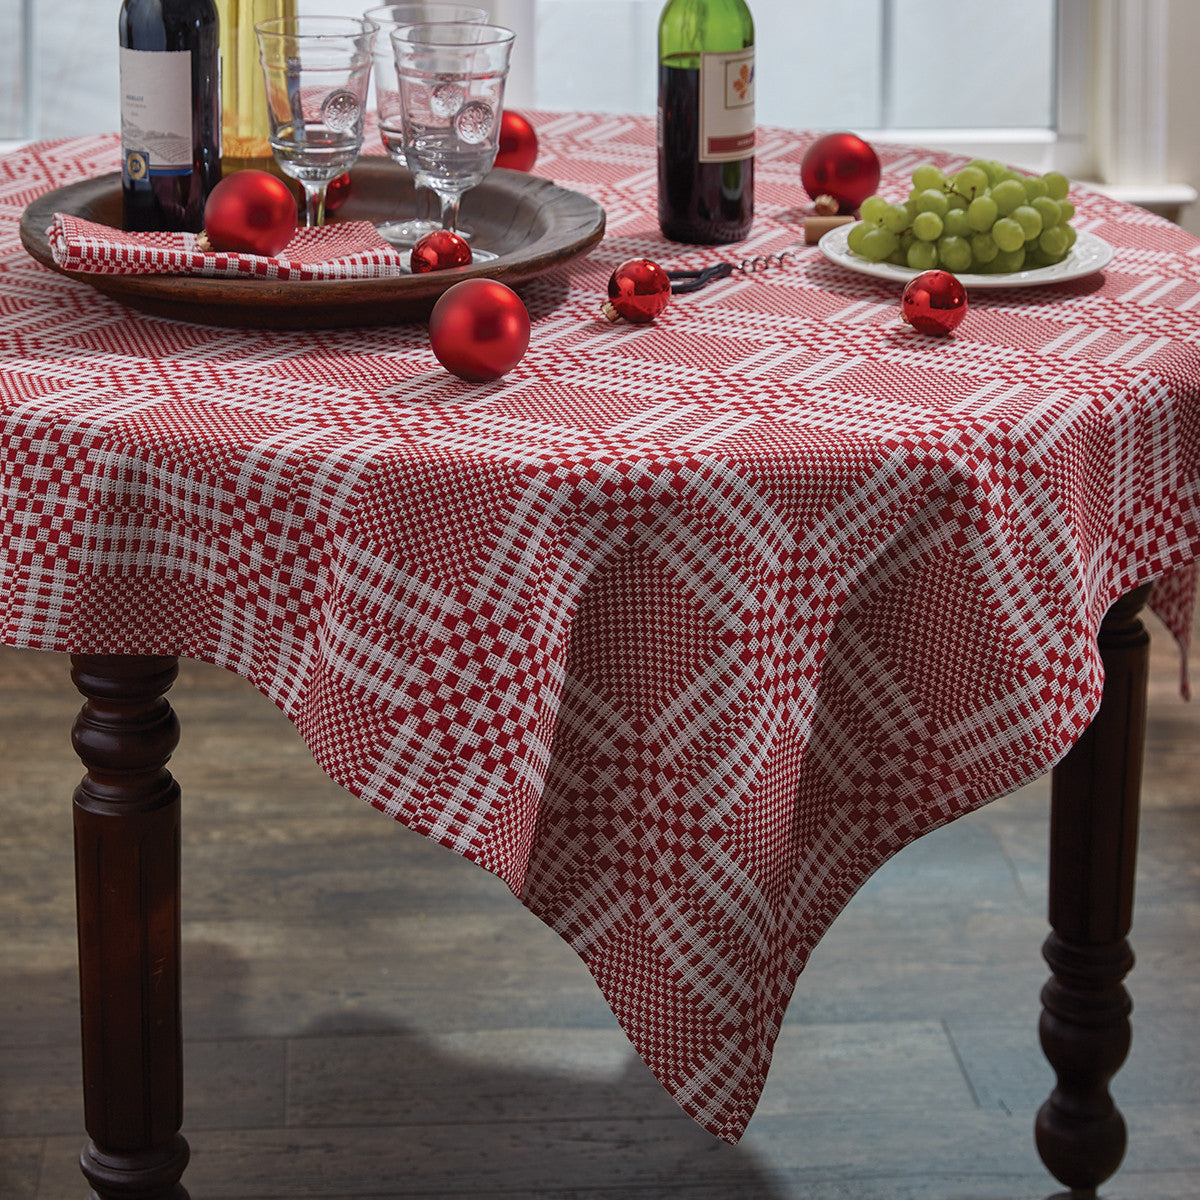 Kings Arms Coverlet Tablecloth - 54"x54" - Park Designs